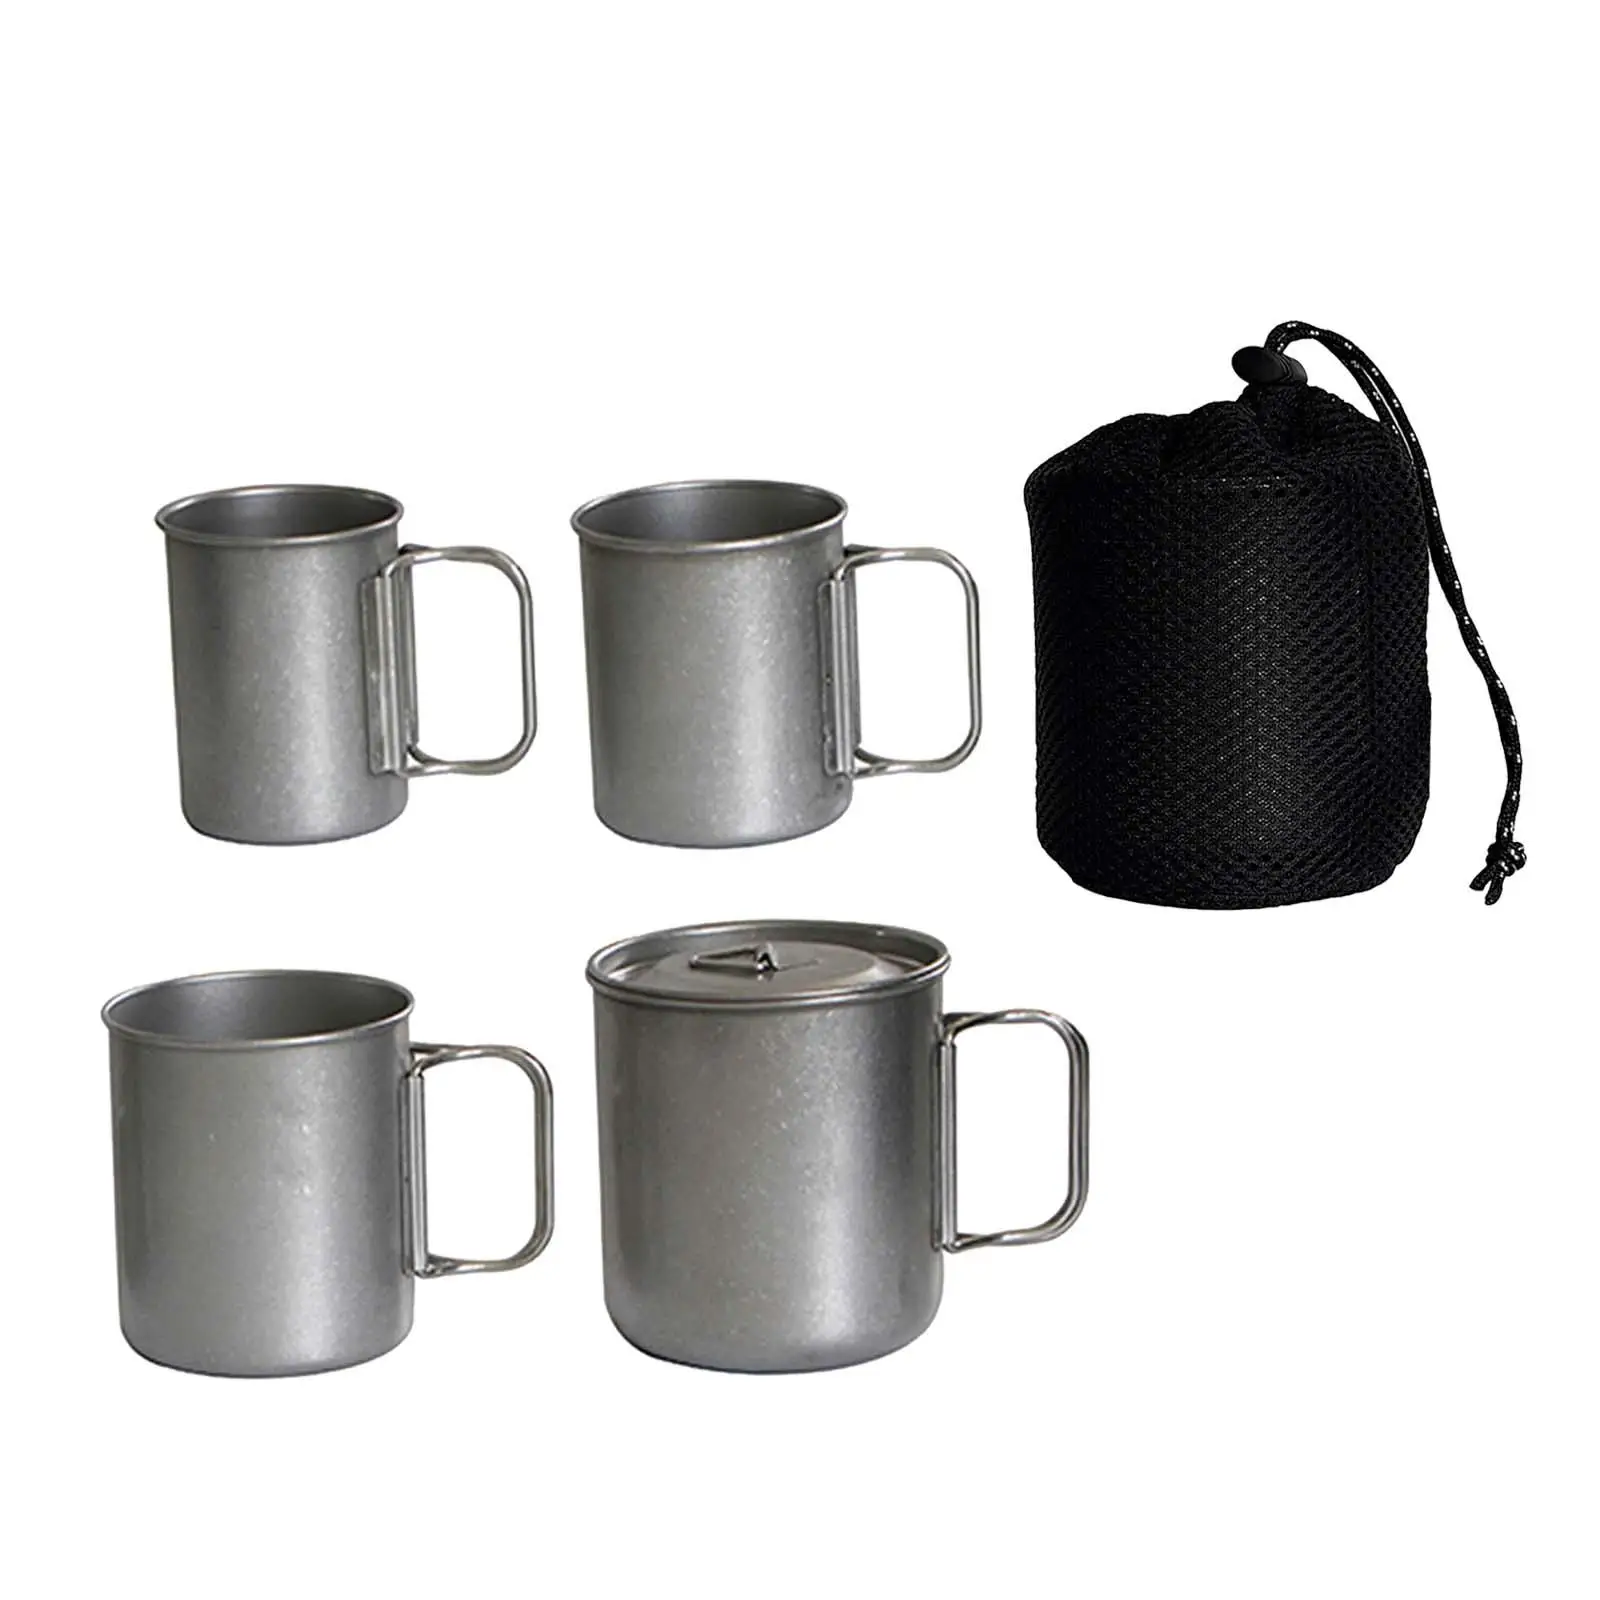 4x Water Cup Mug Teakettle Water Bottle 25oz Tea Coffee Mugs with Lid Camping Cup Pot Stackable Cups for Mountaineering Barbecue